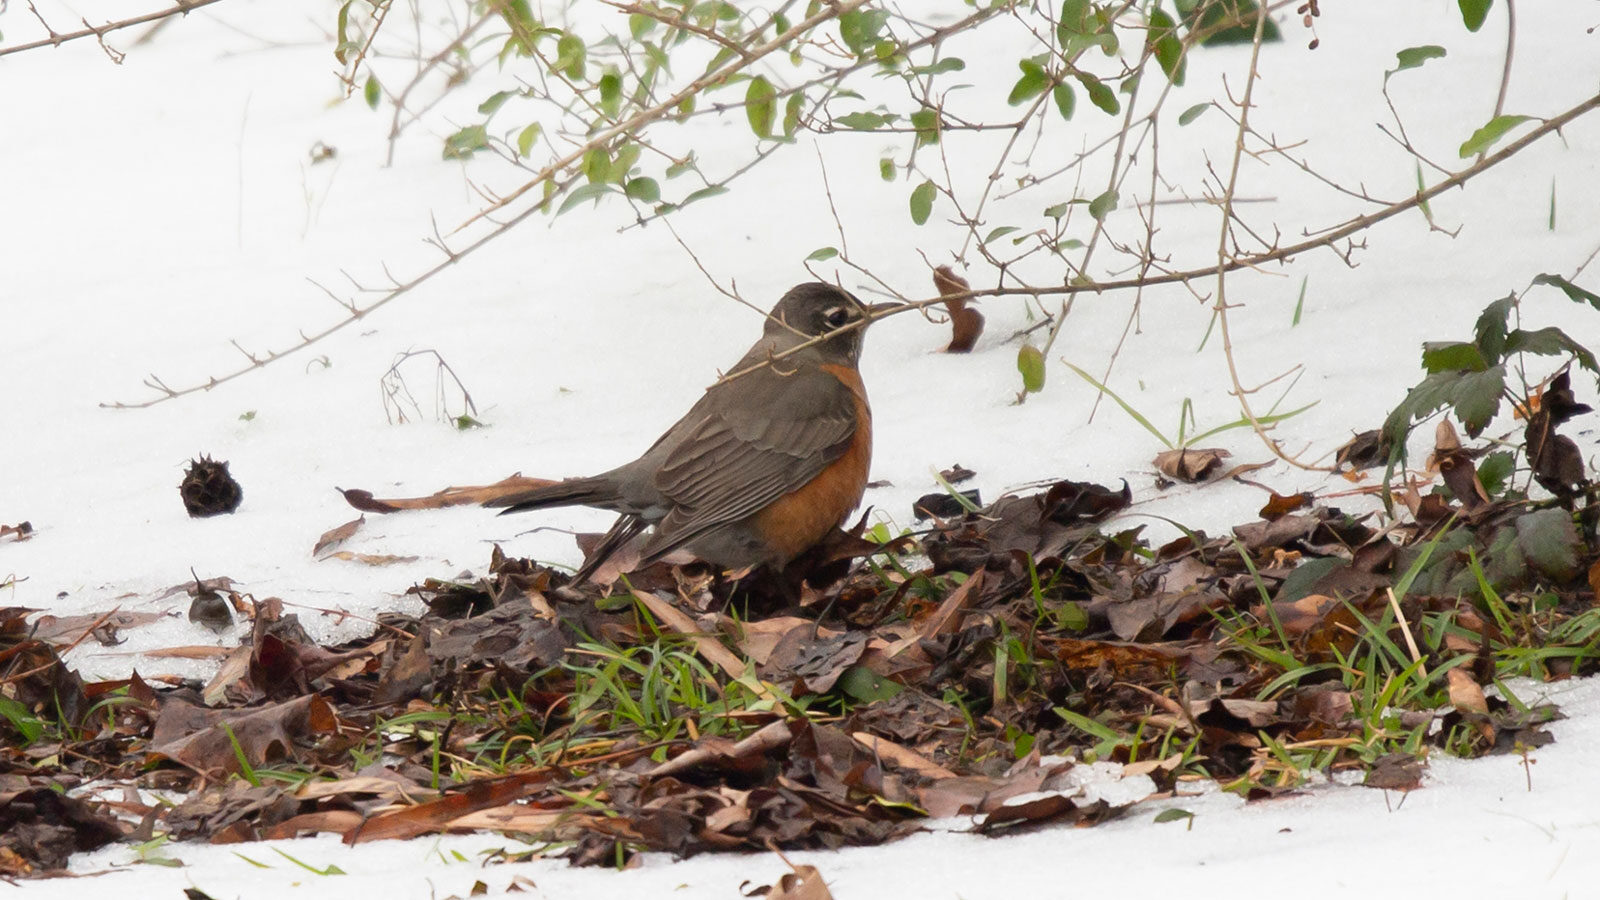 American robin standing on leaves on the ground surrounded by snow